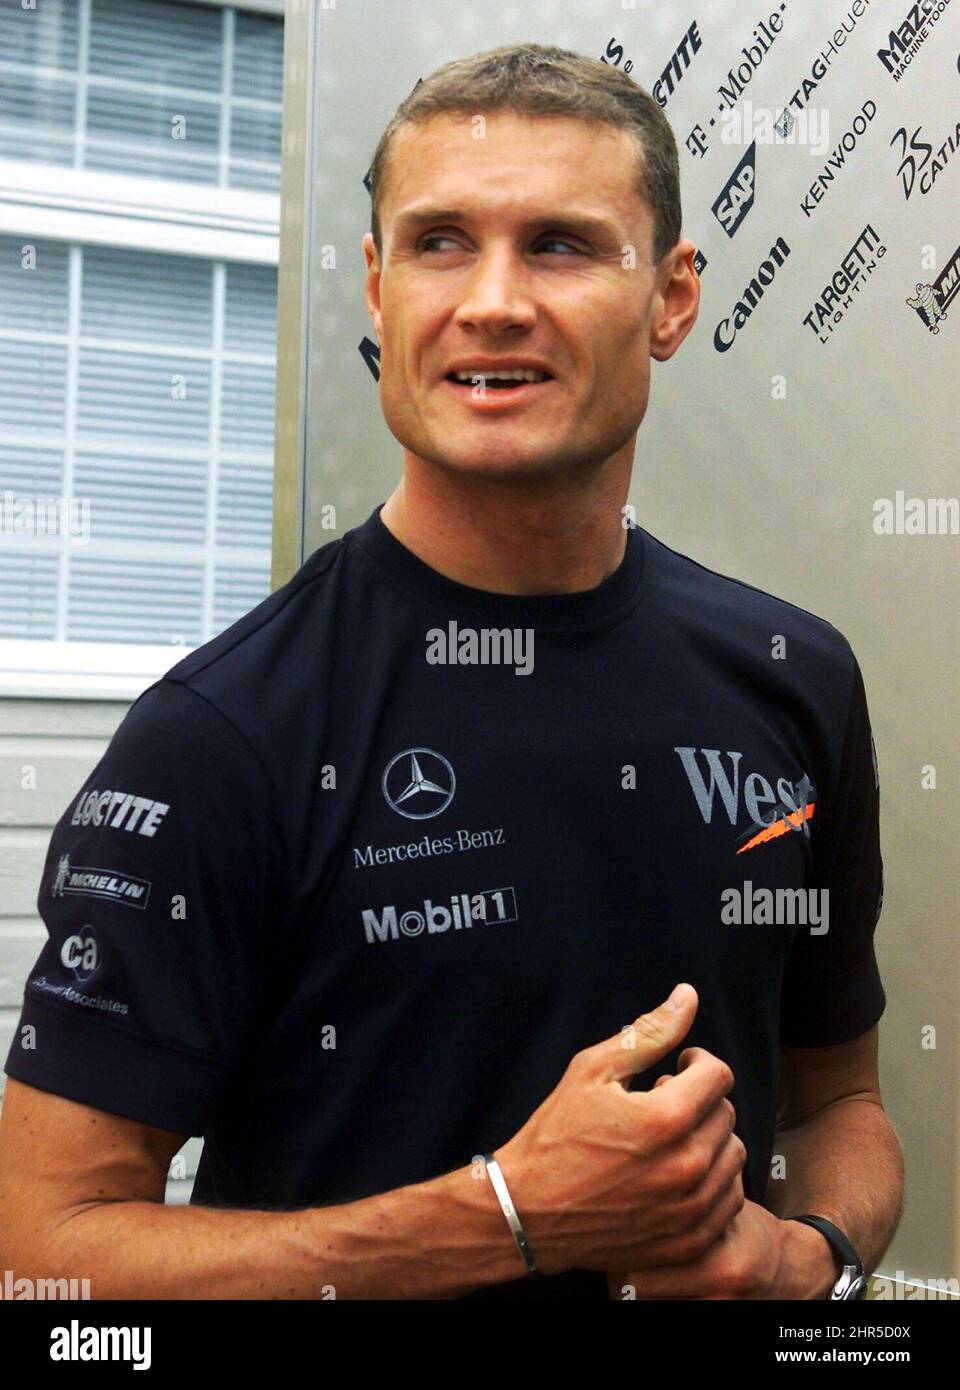 PA PHOTOS/ CP - UK USE ONLY: Britain's David Coulthard chats with staff in the paddocks at the Gilles Villeneuve Circuit in Montreal, Thursday, June 6, 2002. Coulthard will race in the Canadian Grand Prix Sunday.  Stock Photo